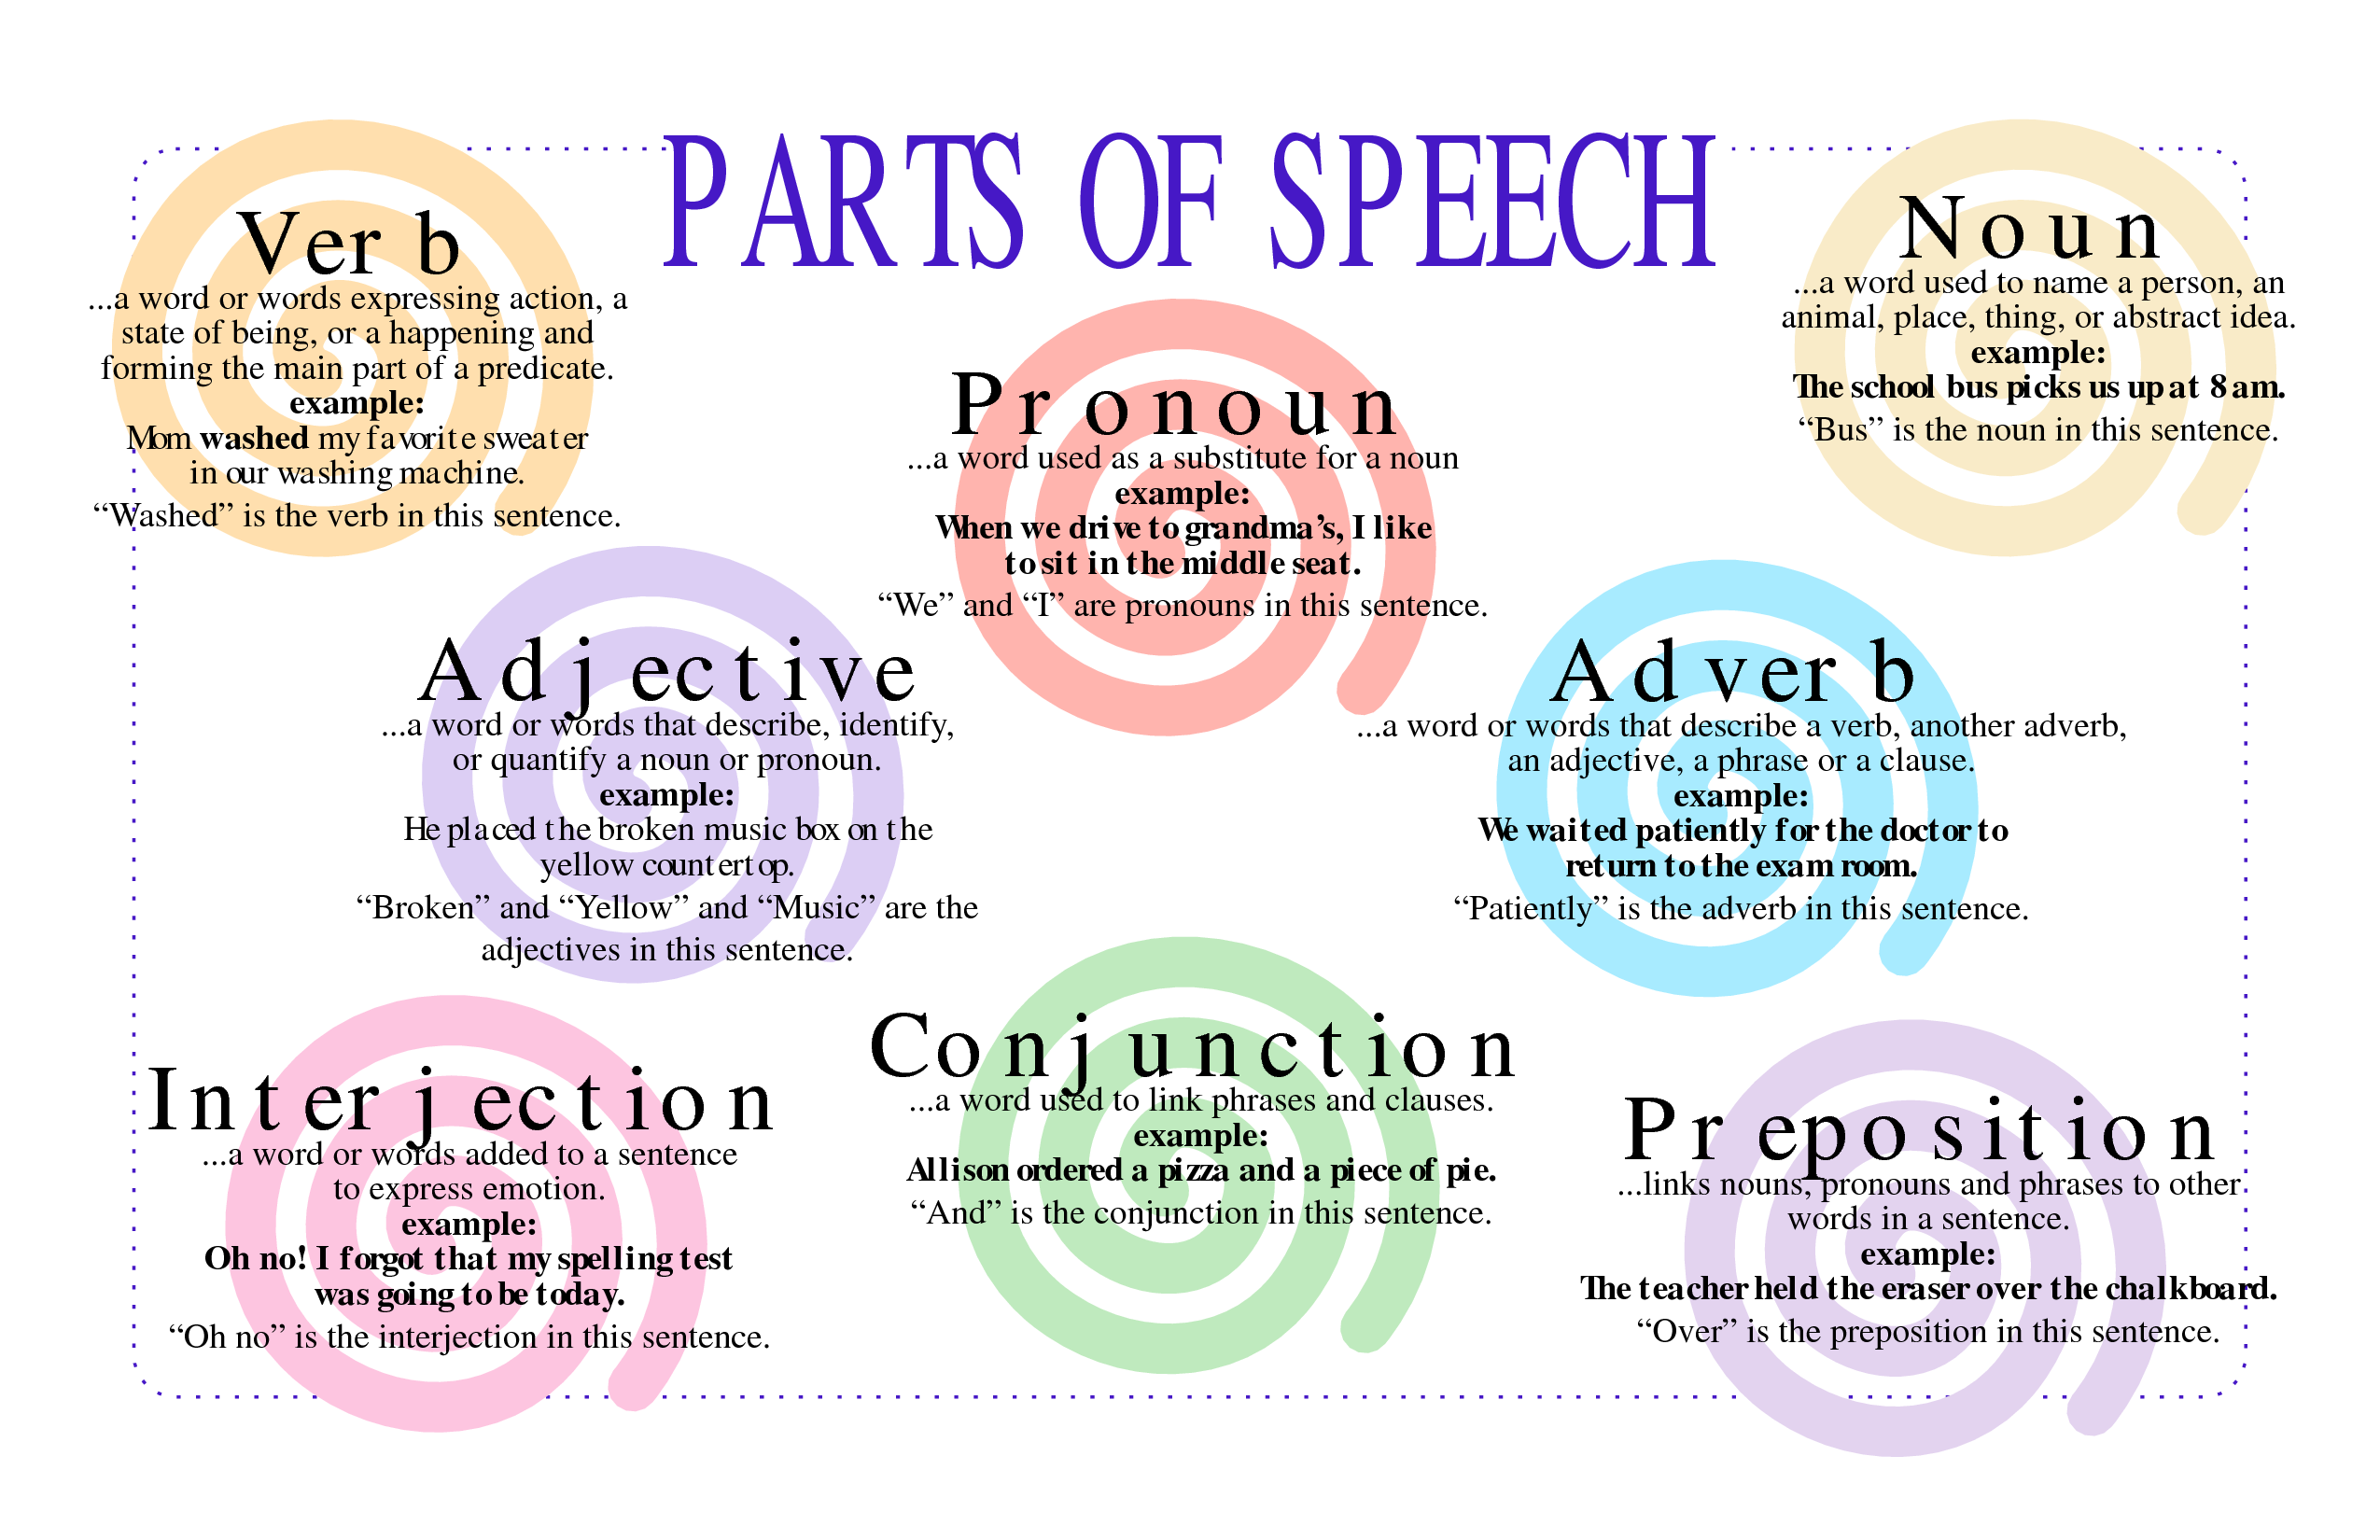 parts-the-parts-of-speech